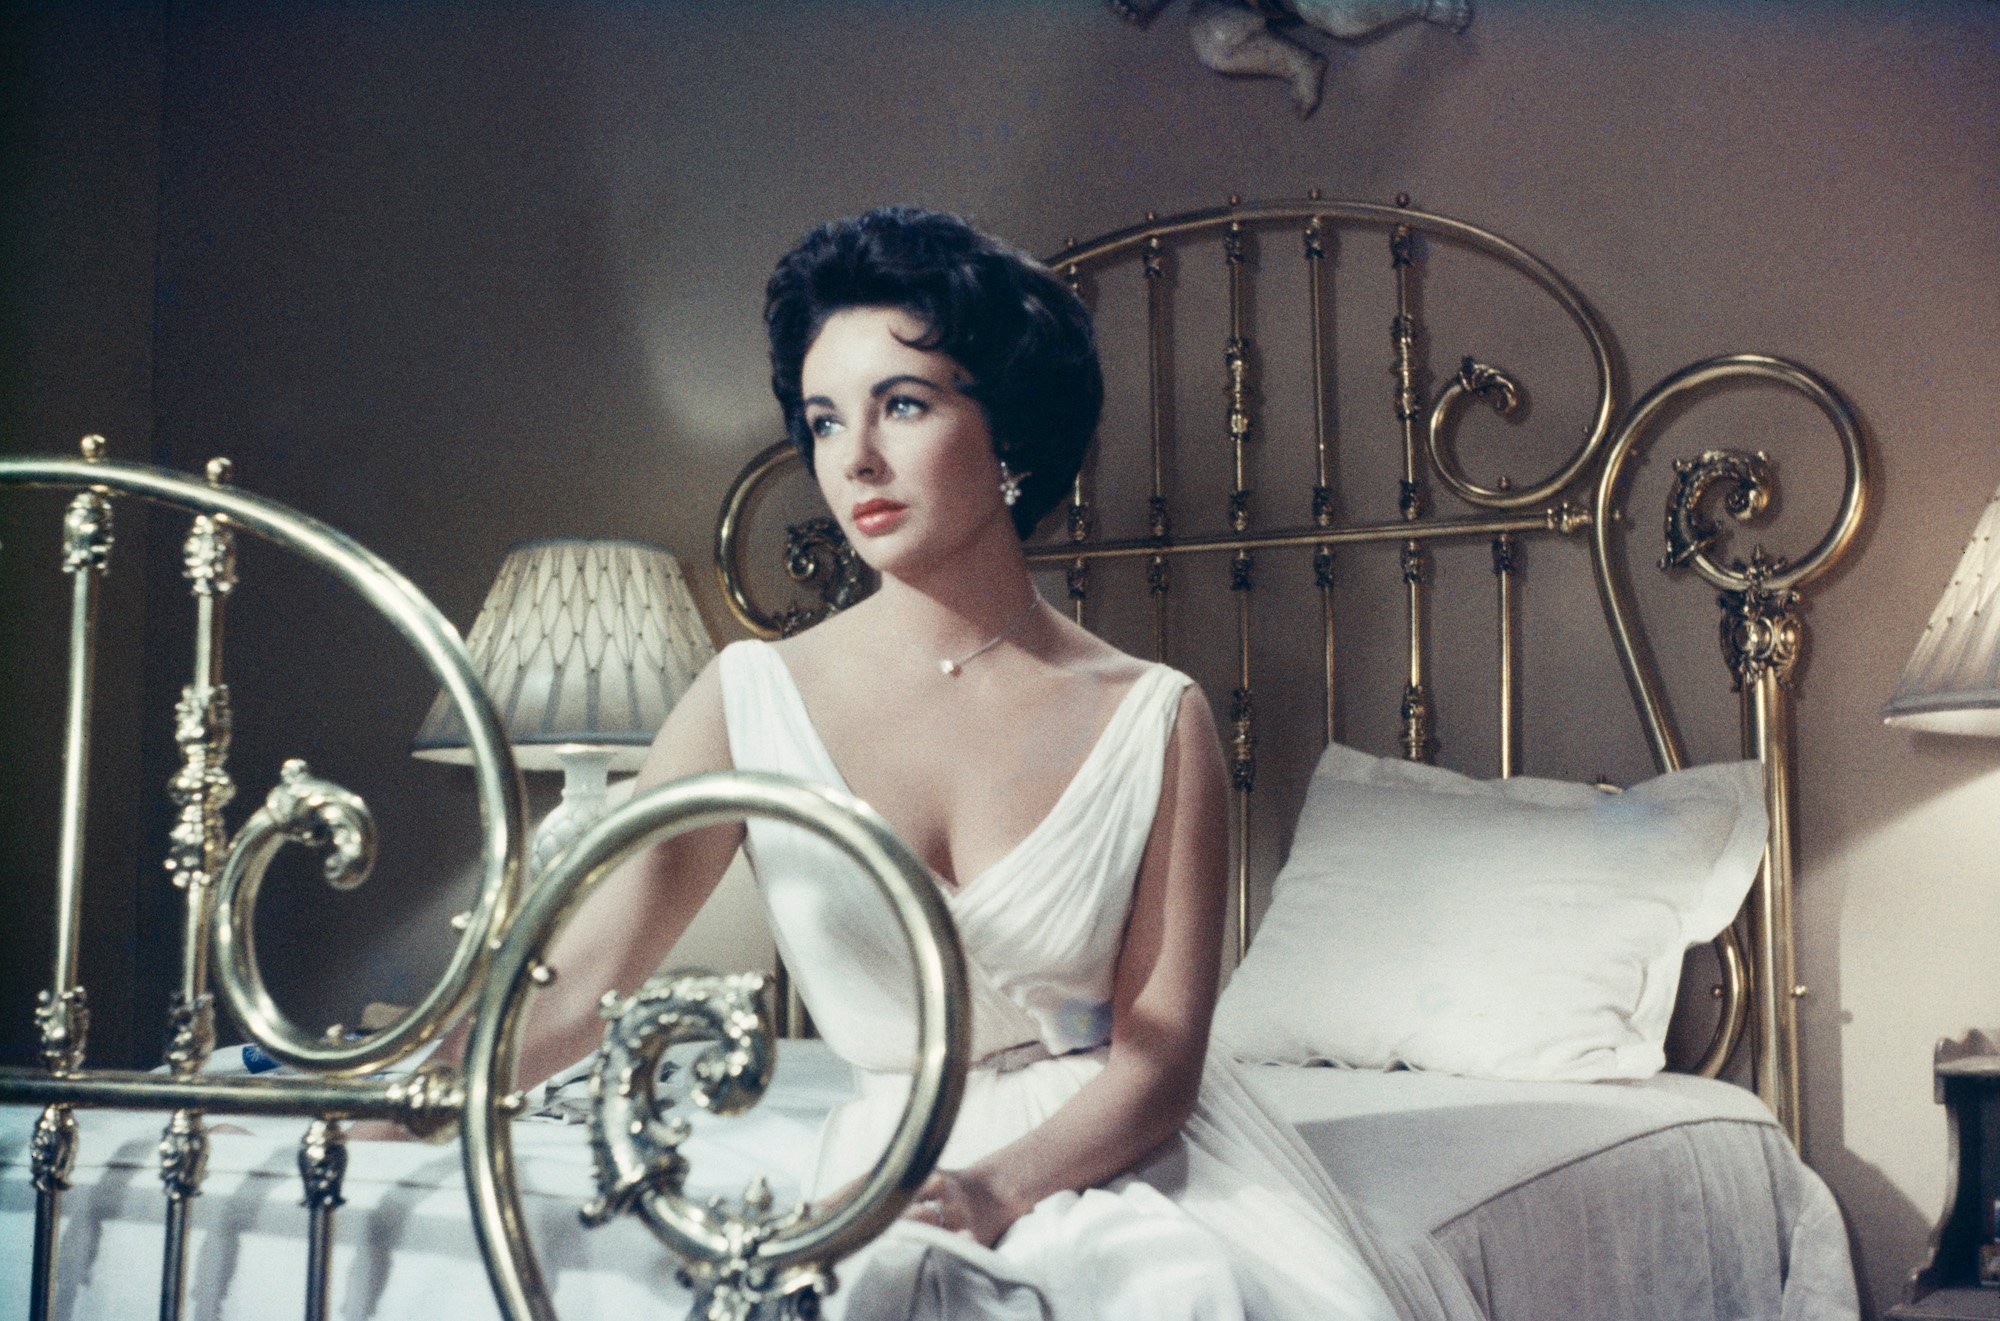 Elizabeth Taylor looking off to the side, seated on a bed, in 'Cat on a Hot Tin Roof'